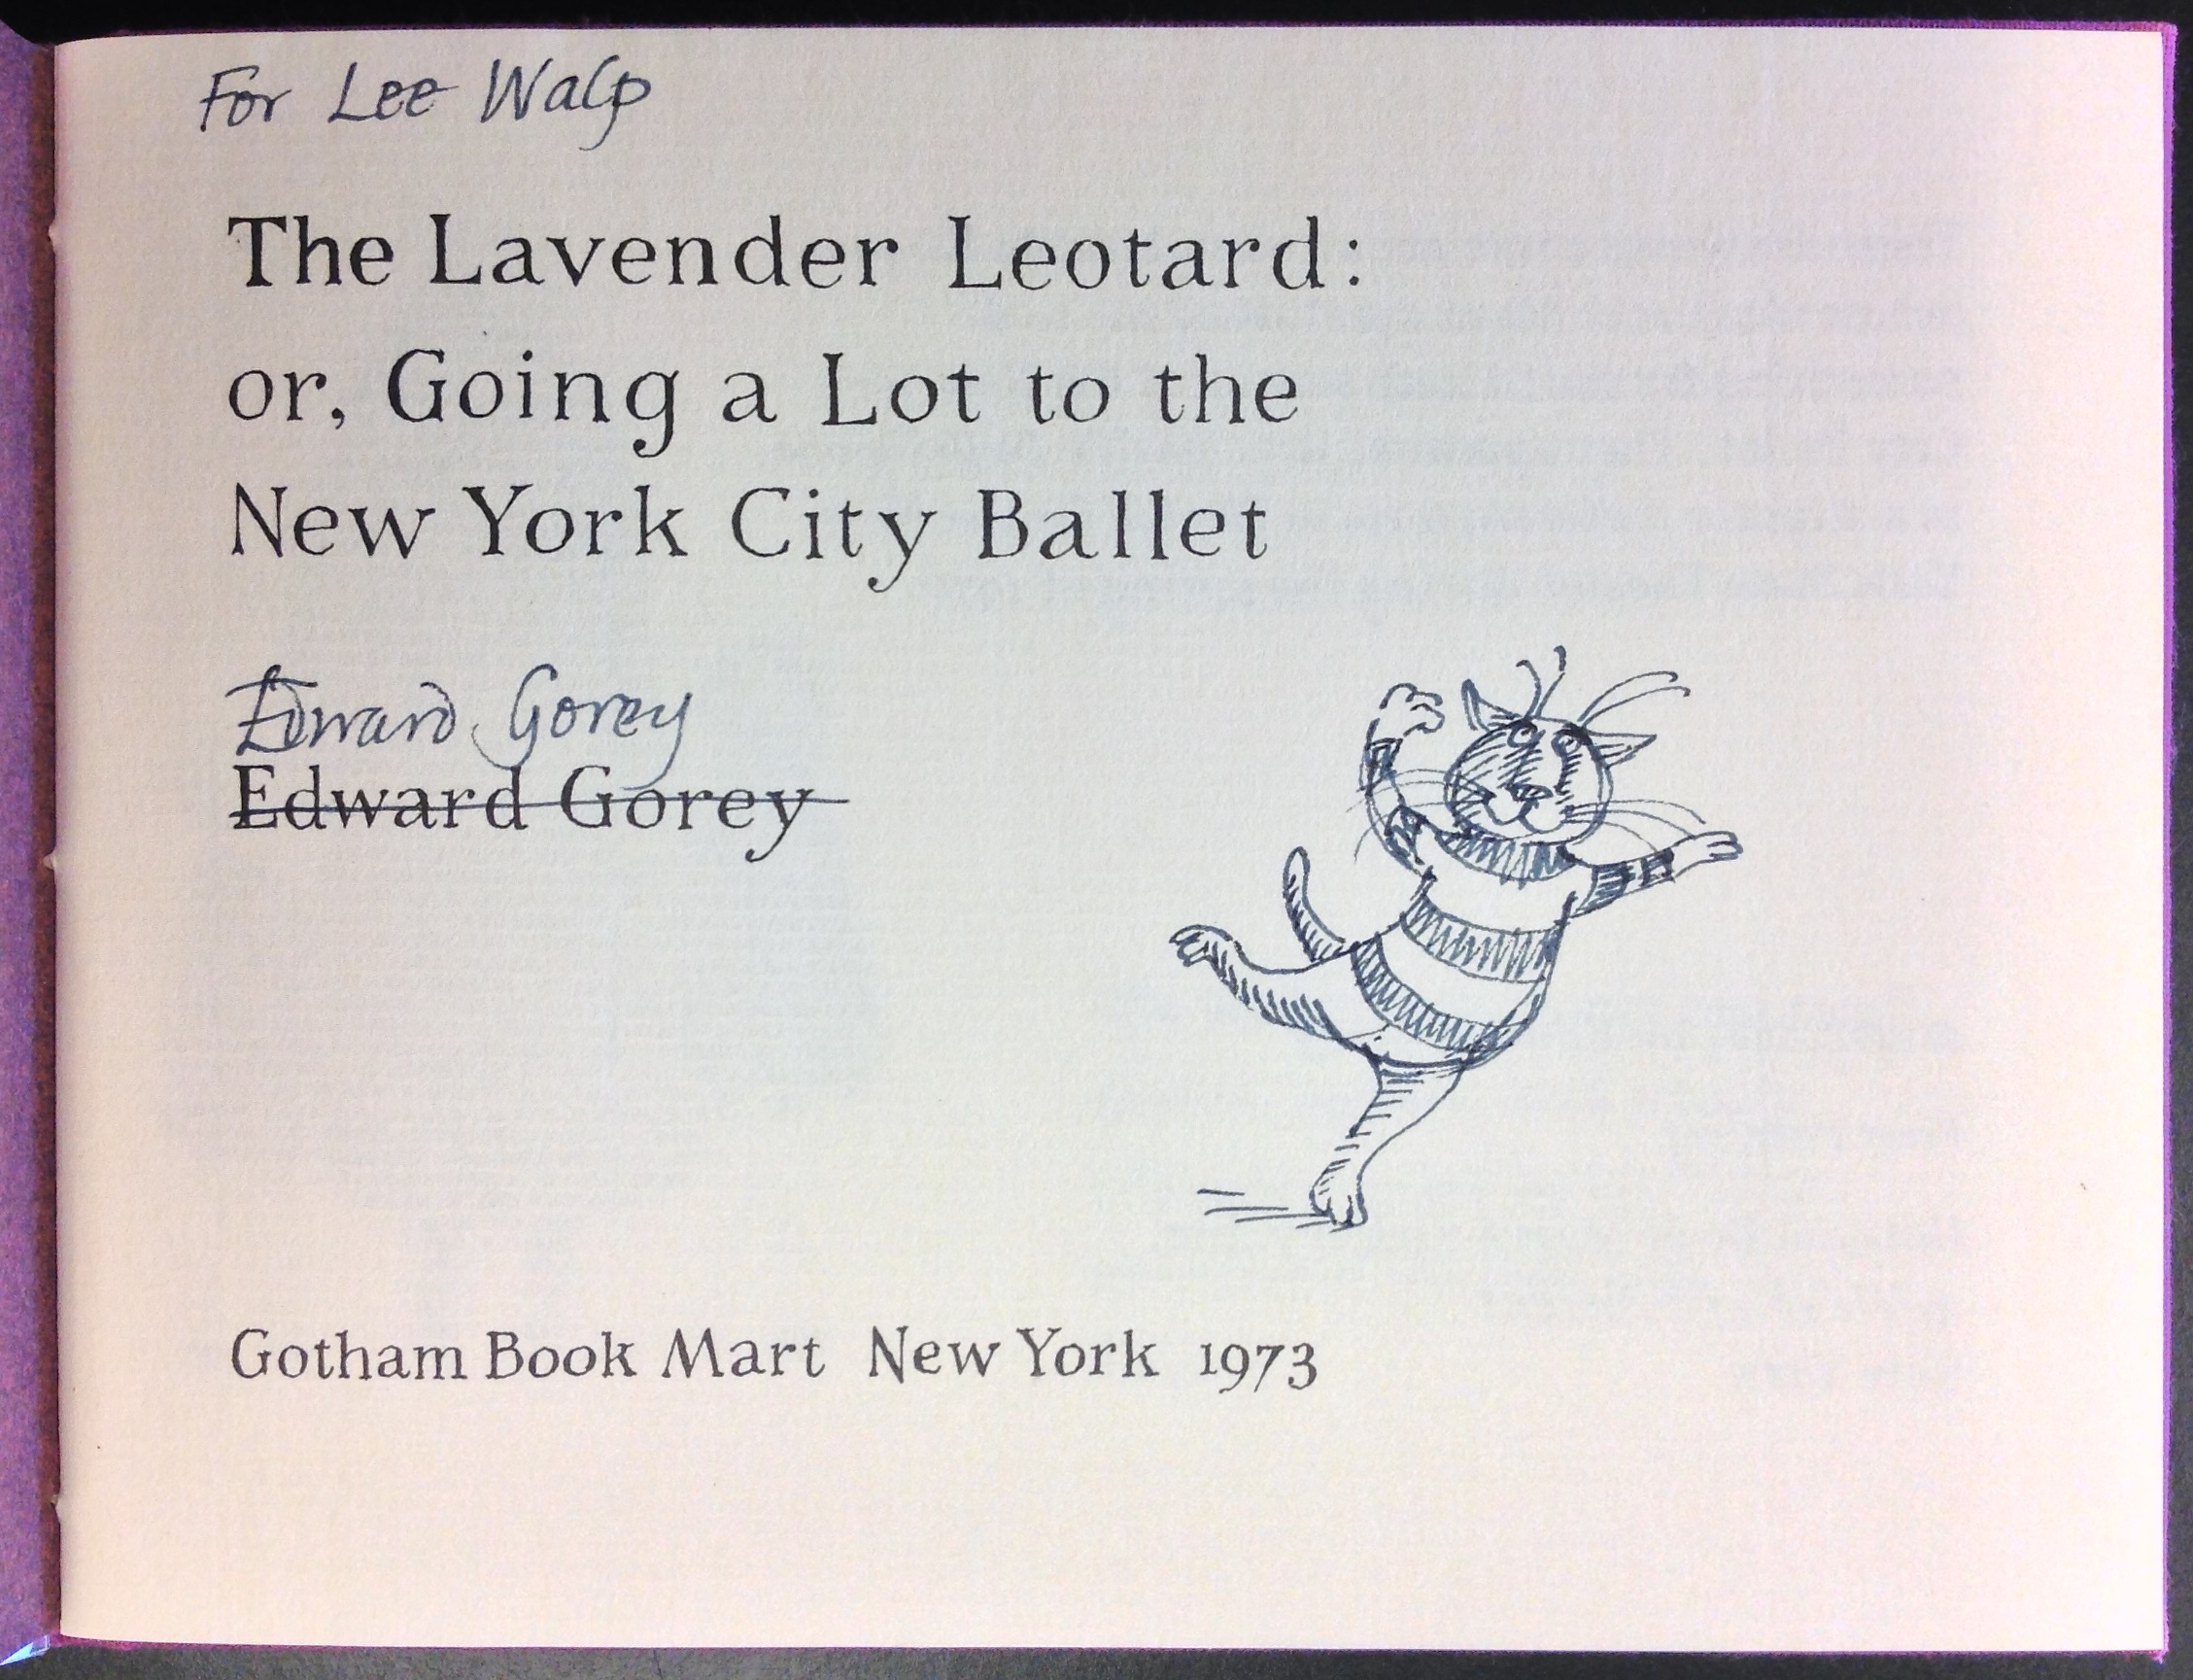 Original drawing and inscription by Edward Gorey: "For Lee Walp"